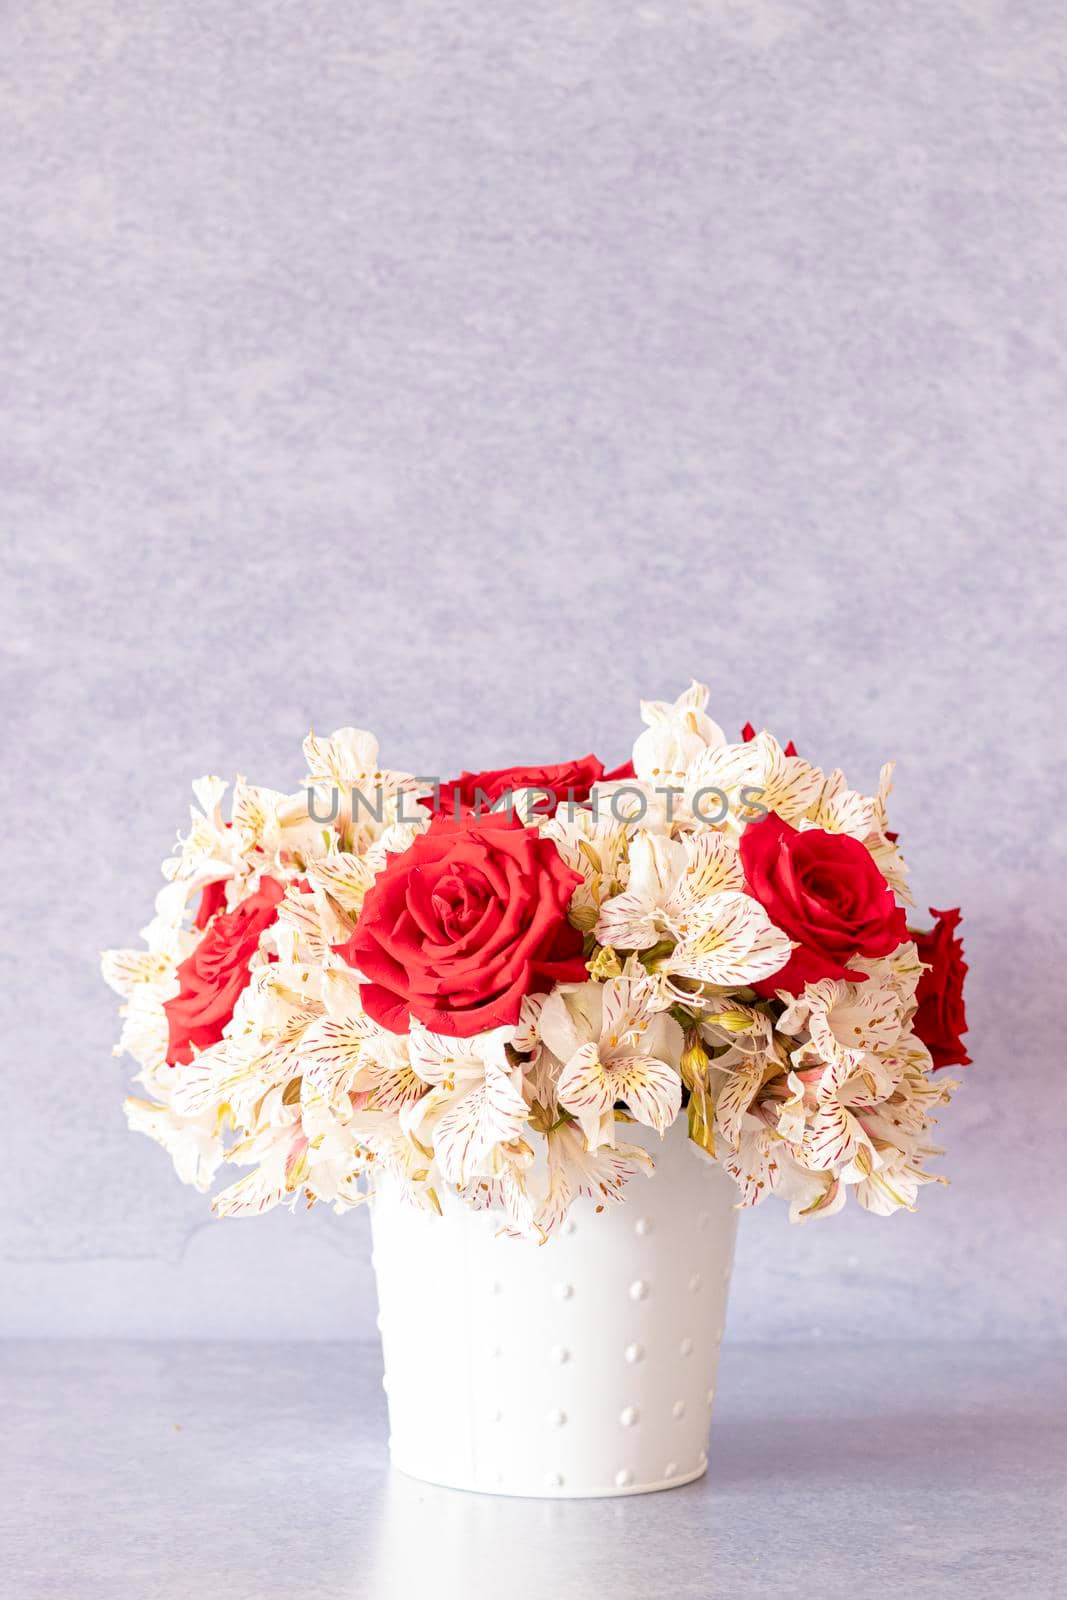 Floral arrangement composed of red roses for spring by eagg13